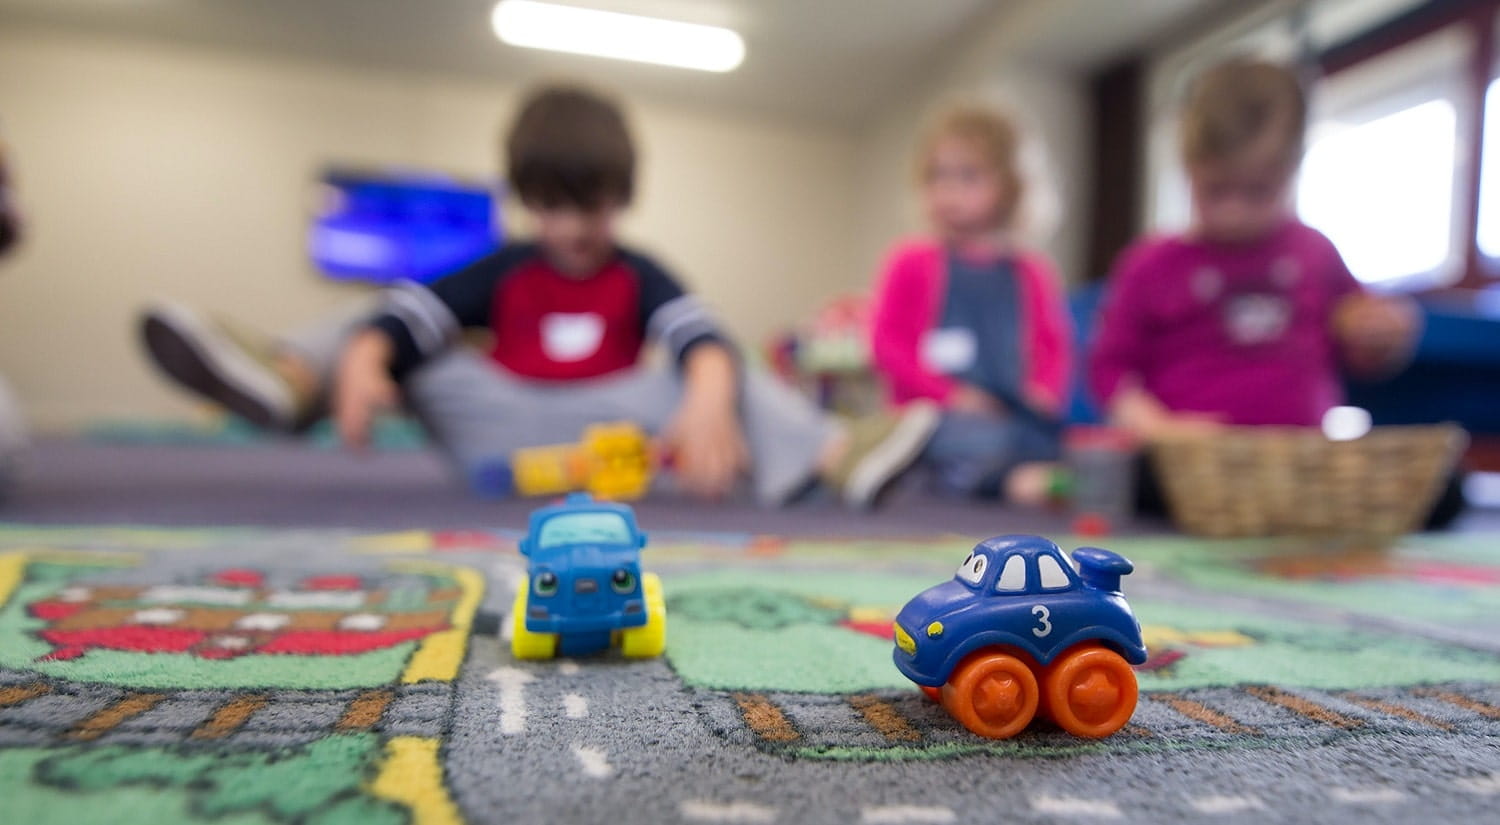 Children in care playing with toys, a possible career as a care worker for students of Therapeutic Communications and Therapeutic Organisations.